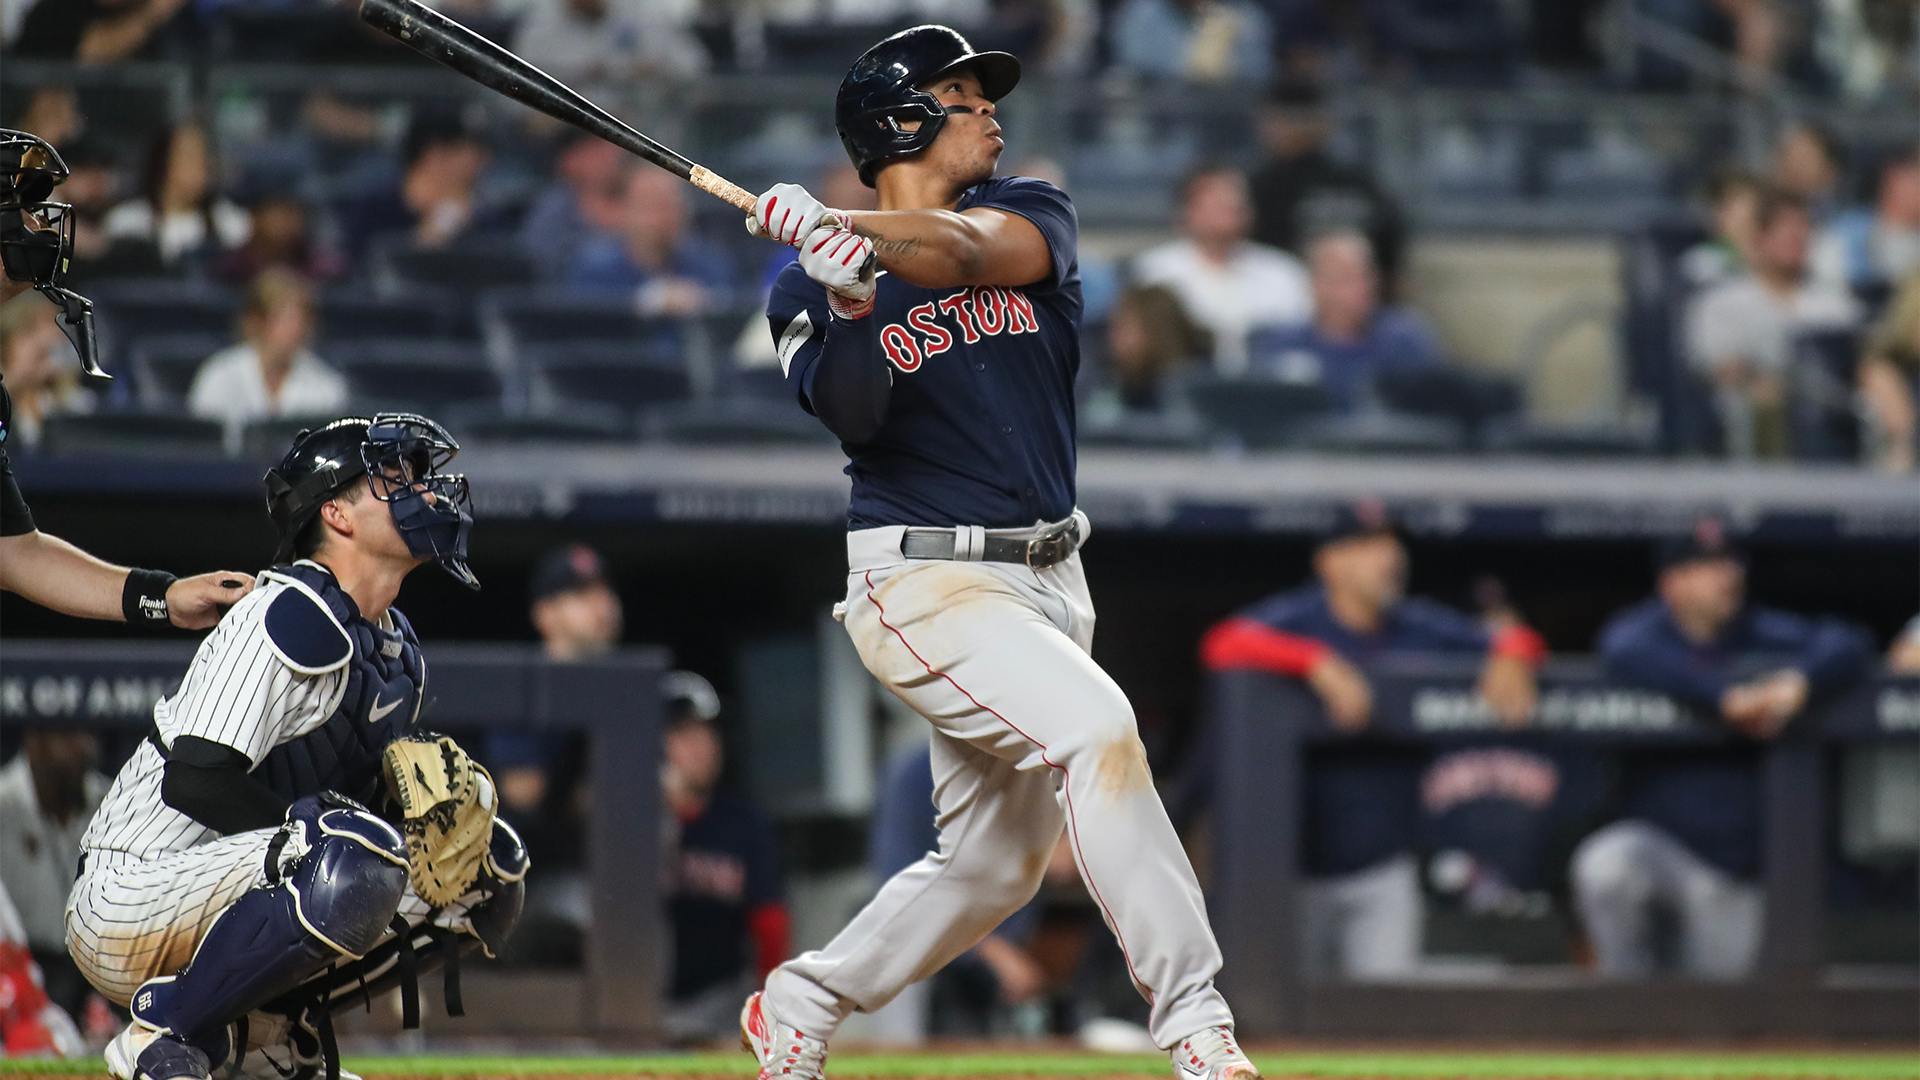 Rafael Devers' Ruthian night propels Red Sox to victory over Yankees